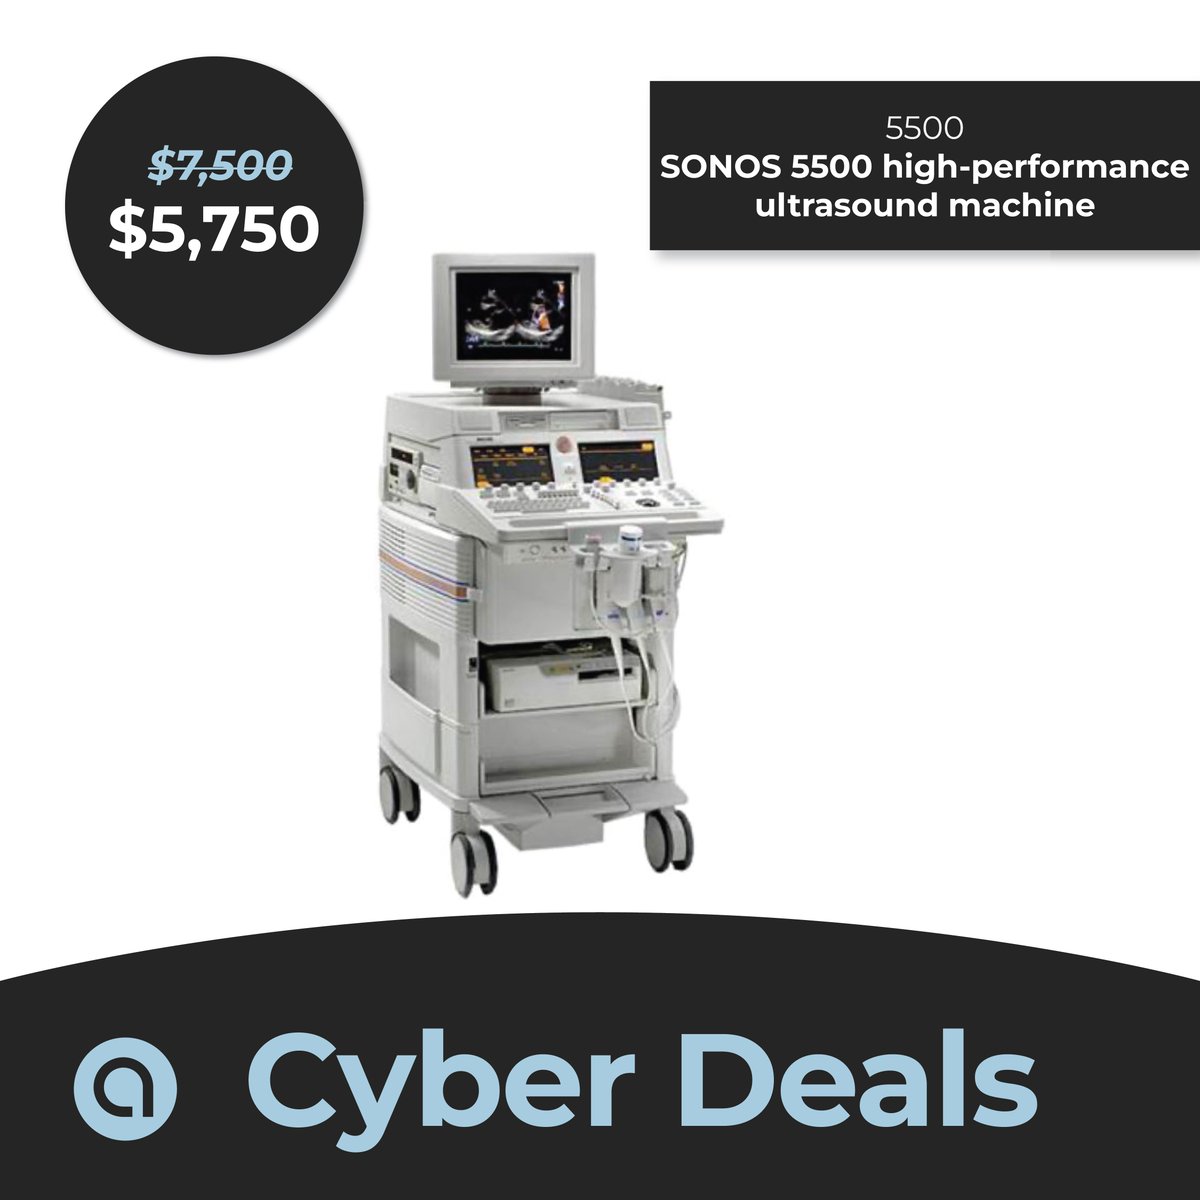 Cyber deals are EXTENDED! Incredible products with our cyber deal prices, including Stryker, Olympus, Arthrex, and more. Take advantage of these limited-time BOGO, 15% off, and 20% off deals! #CyberDeals #CyberMonday #Stryker #Olympus #Arthrex #AAMedical